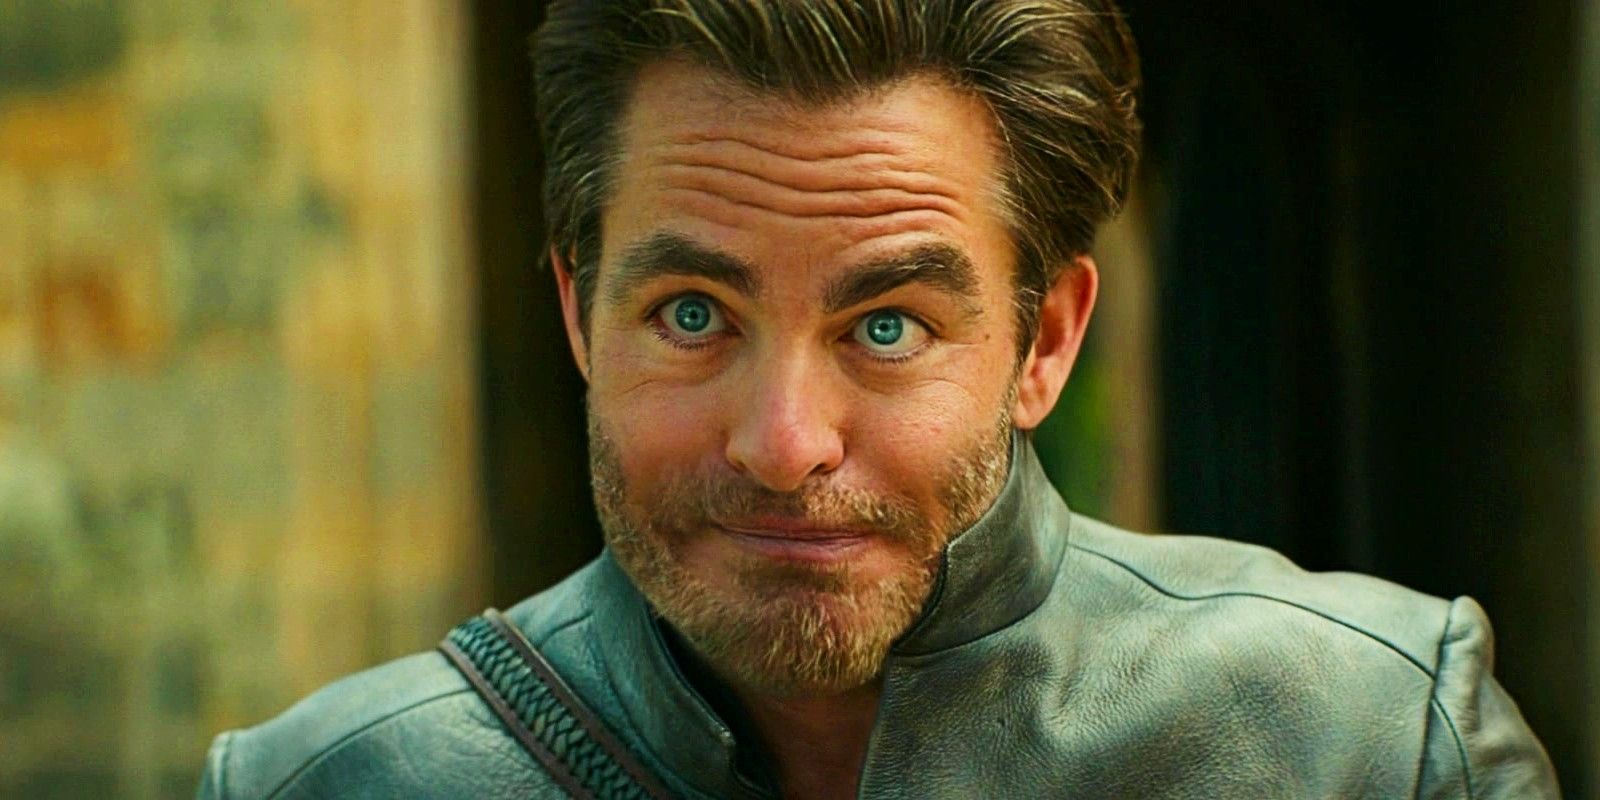 Chris Pine Failed The O.C. Audition For One Reason, Reveals Casting Director